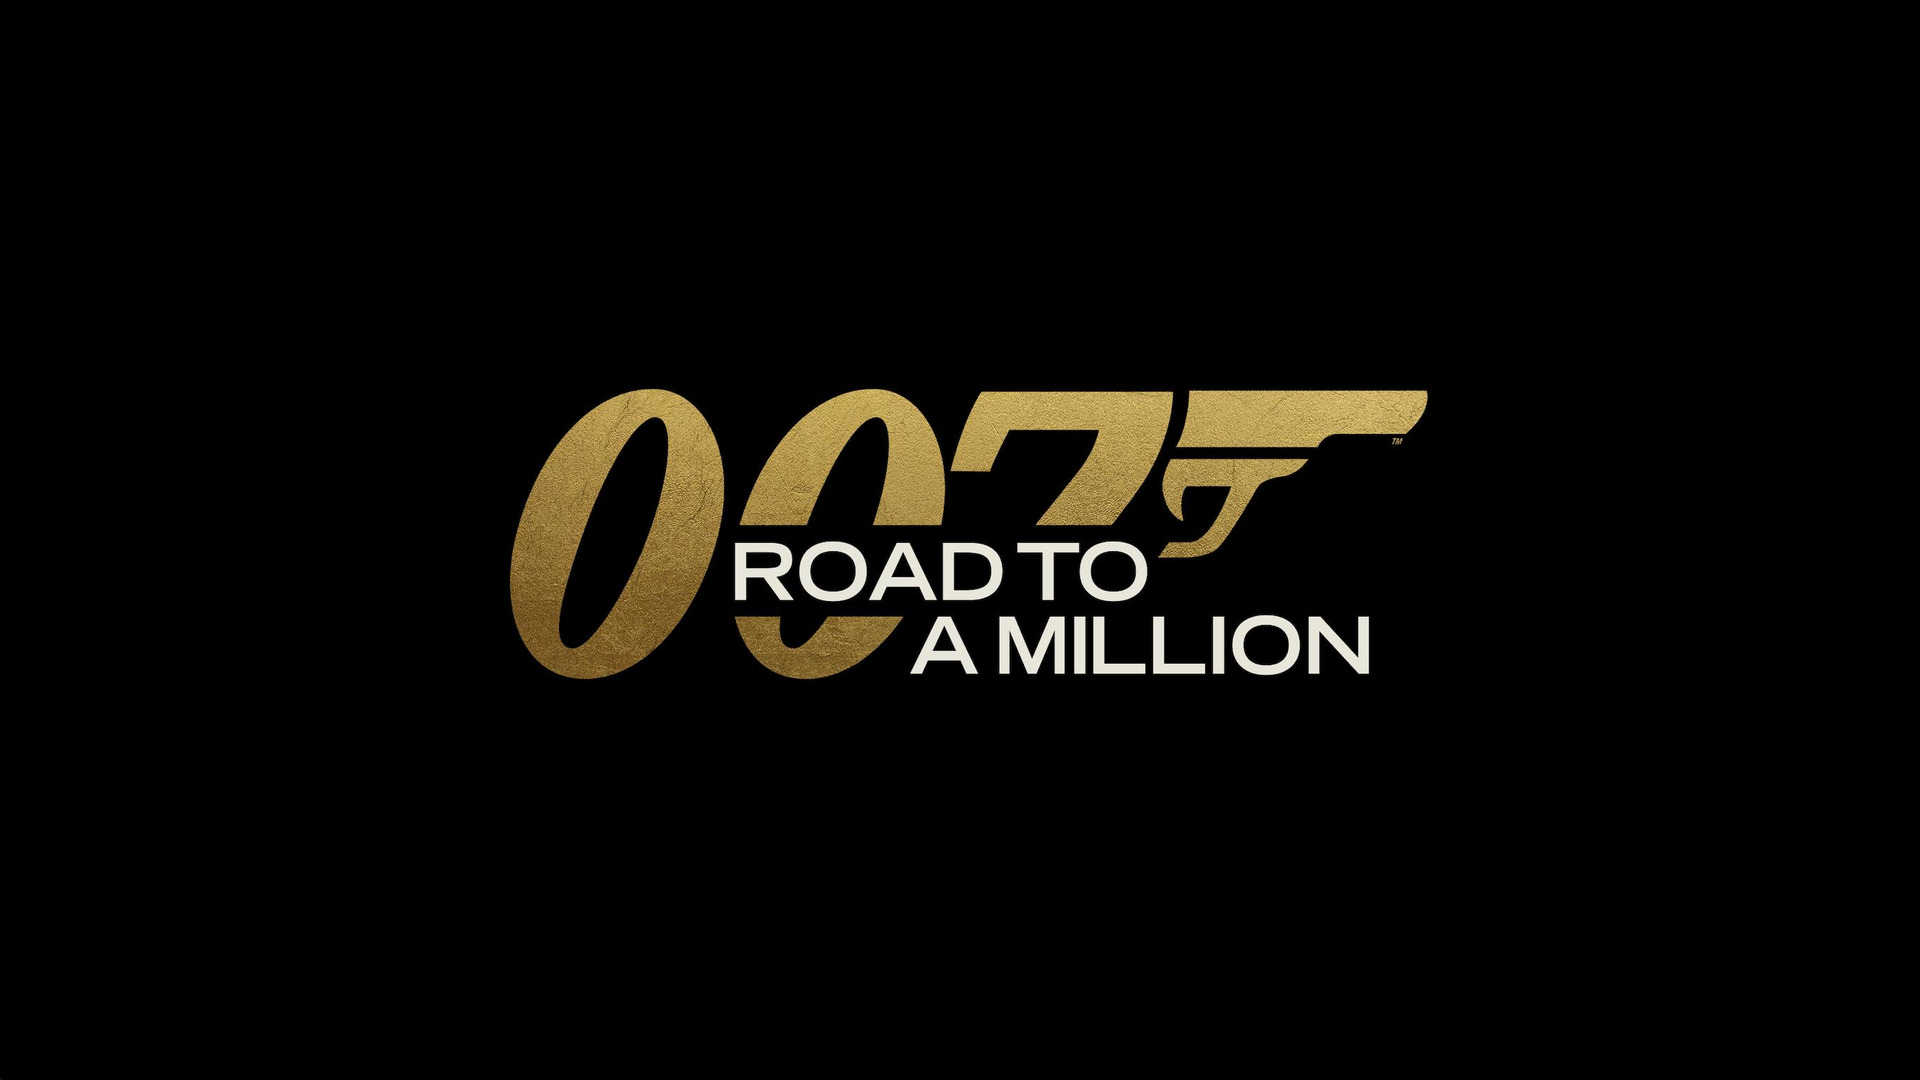 Show 007: Road to a Million